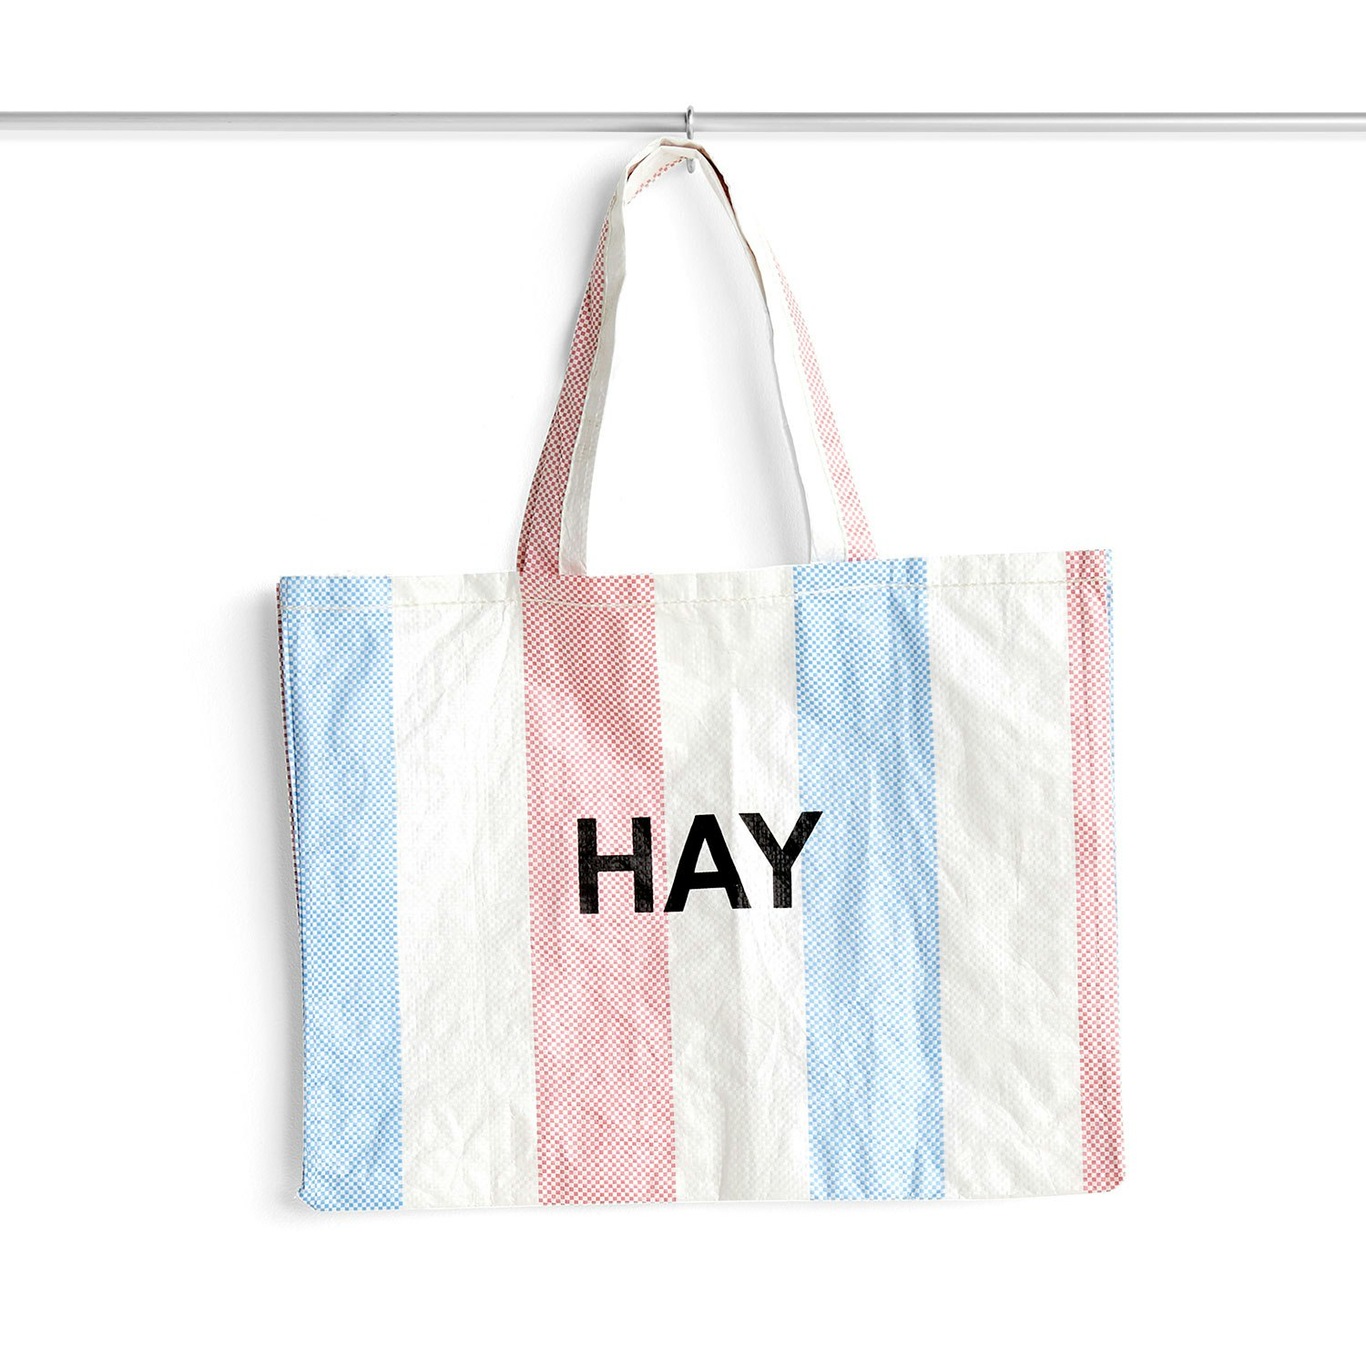 Candy Striped M Bag, White/Blue / Red